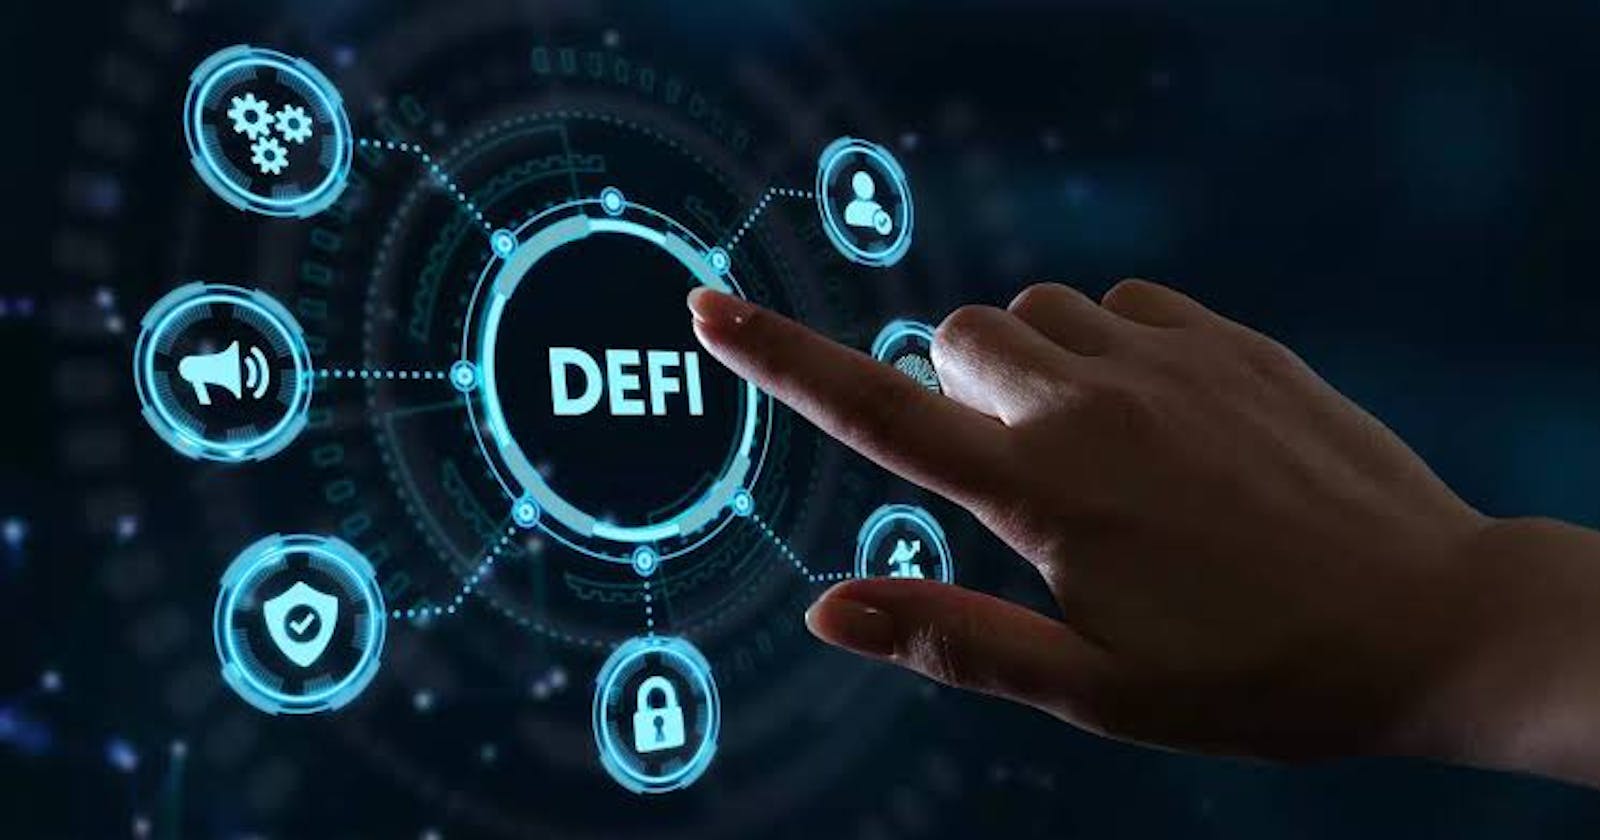 Decentralized finance (DeFi) and its potential in the crypto world